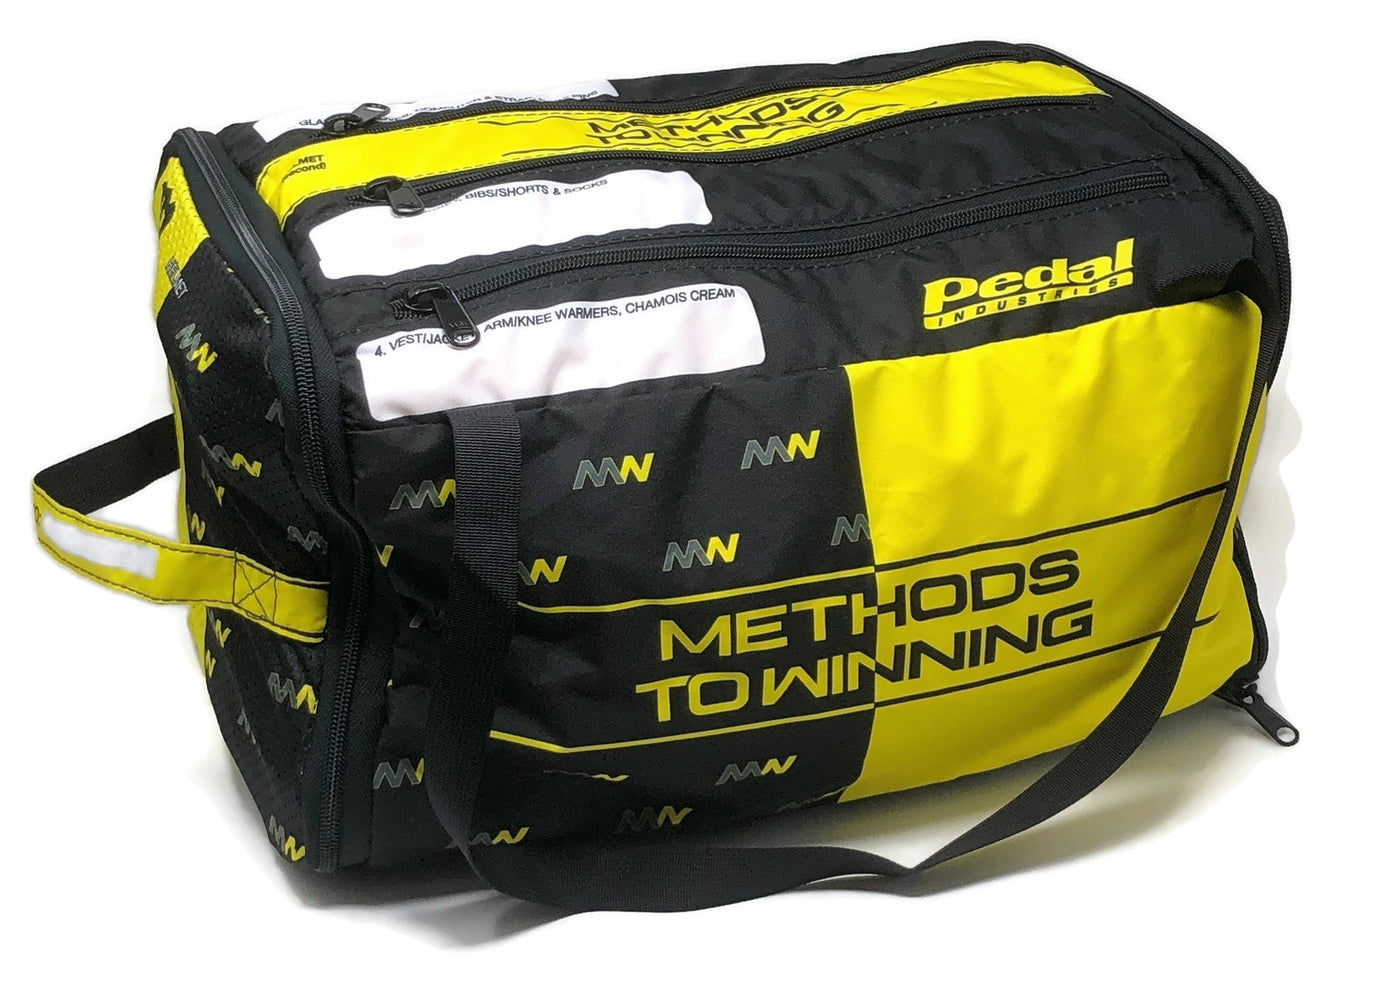 METHODS TO WINNING RACEDAY BAG - ships in about 3 weeks